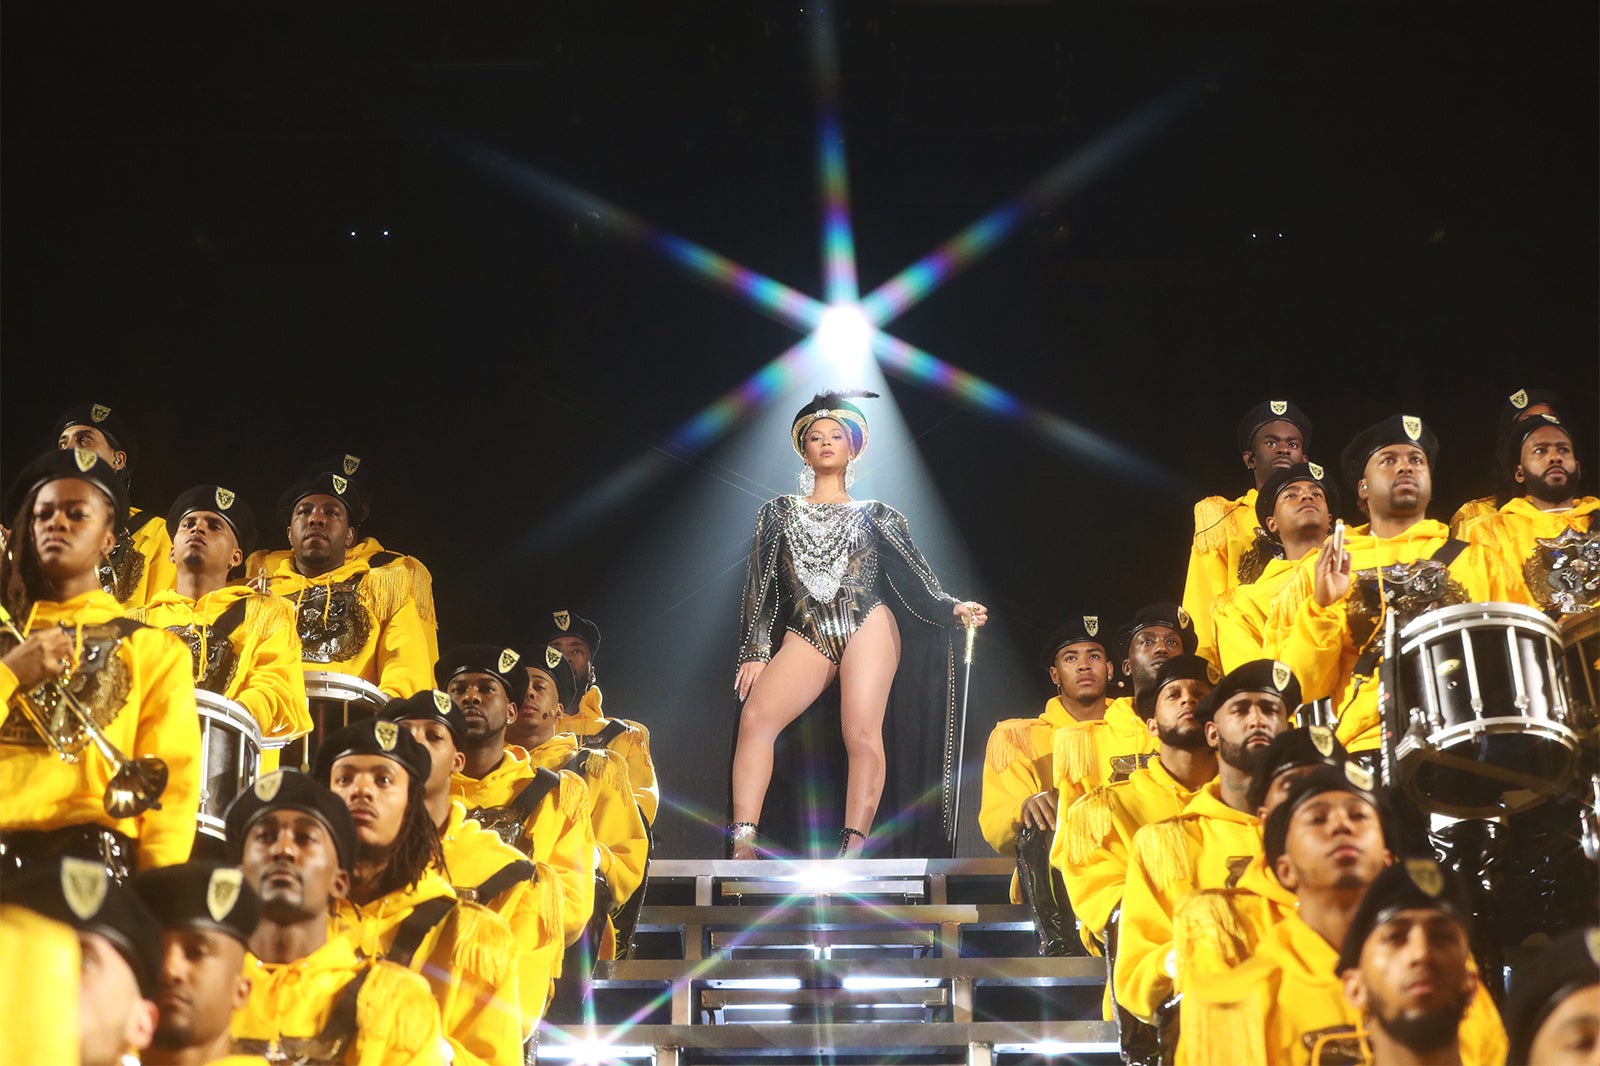 On Beychella, HBCU’s And Black Culture: Beyoncé’s Performance Reinforced That We Never Need Whiteness To Validate Us